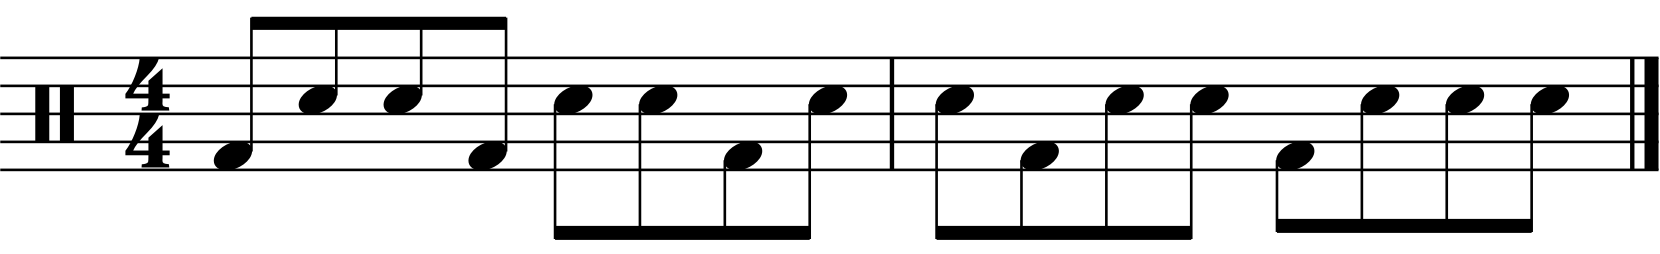 The kick and snares for this version of the groove